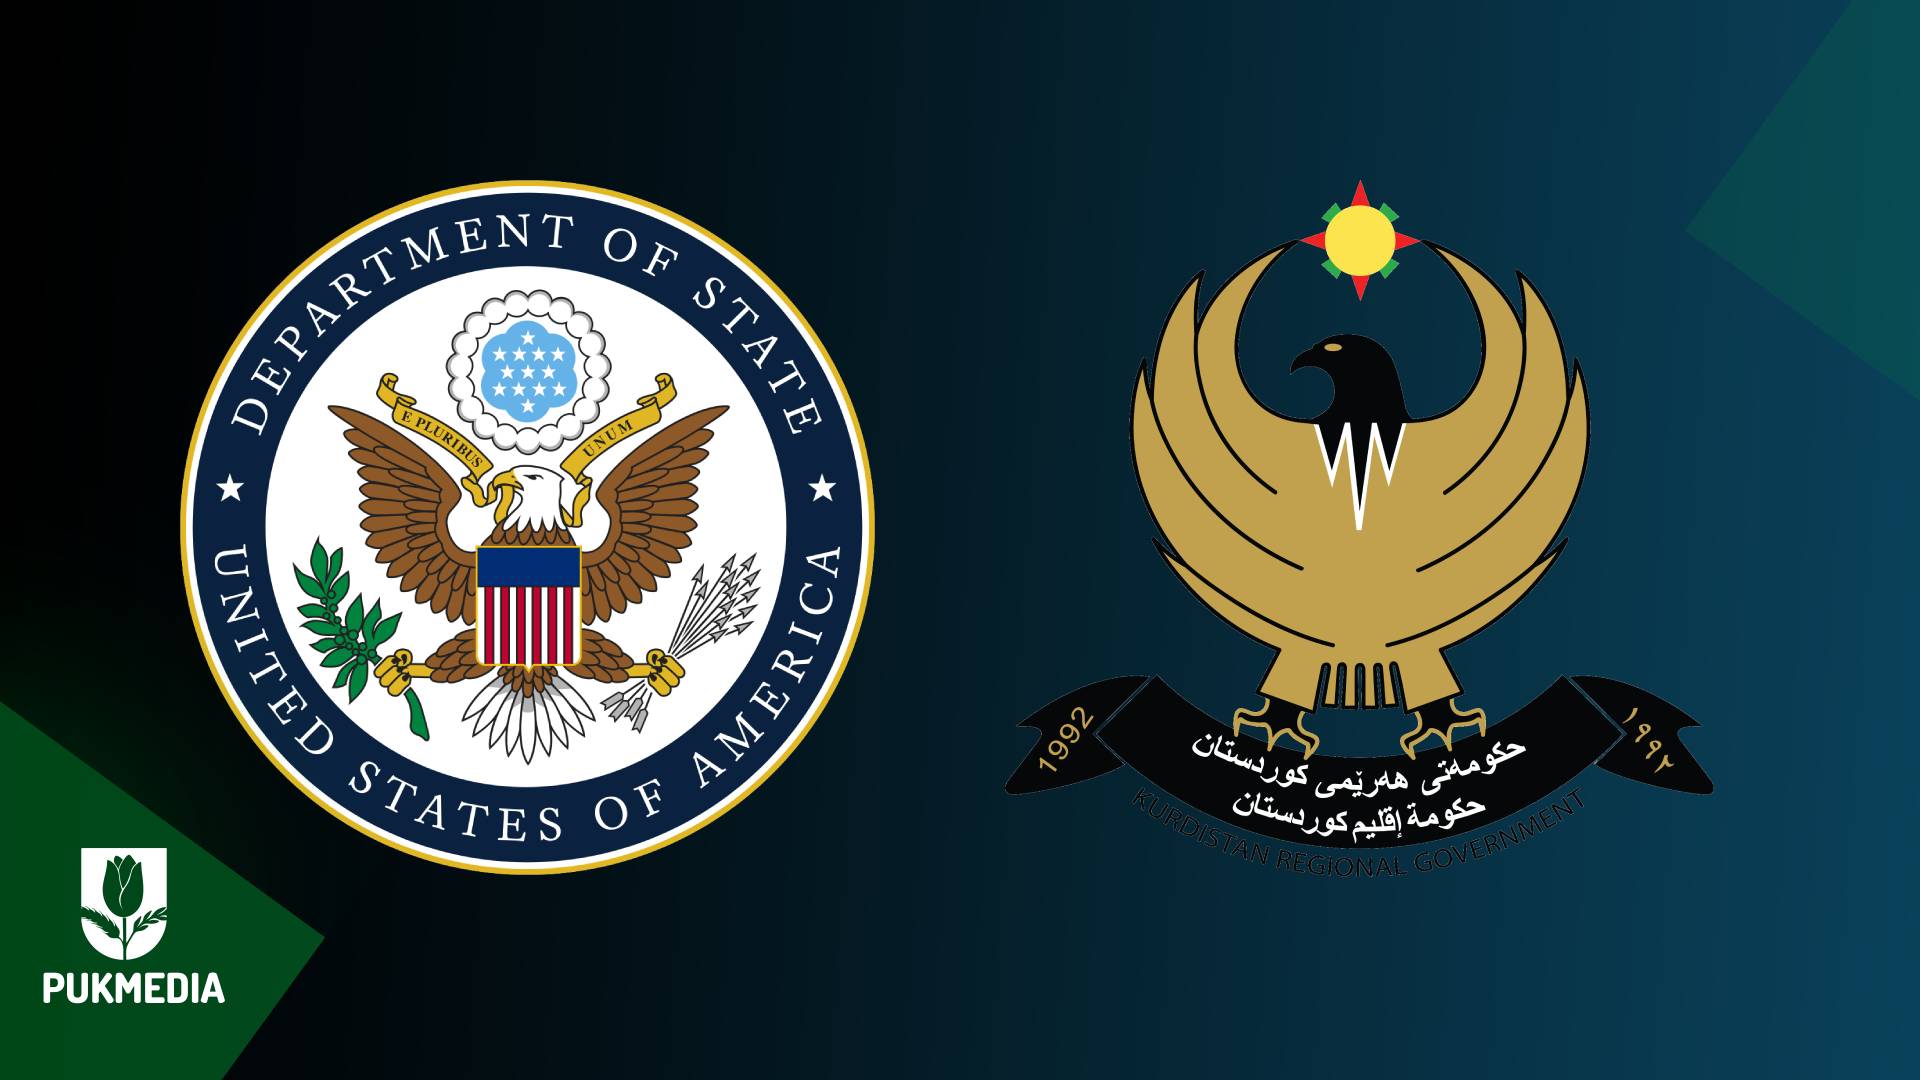  US State Department logo on the left and KRG logo on the right.